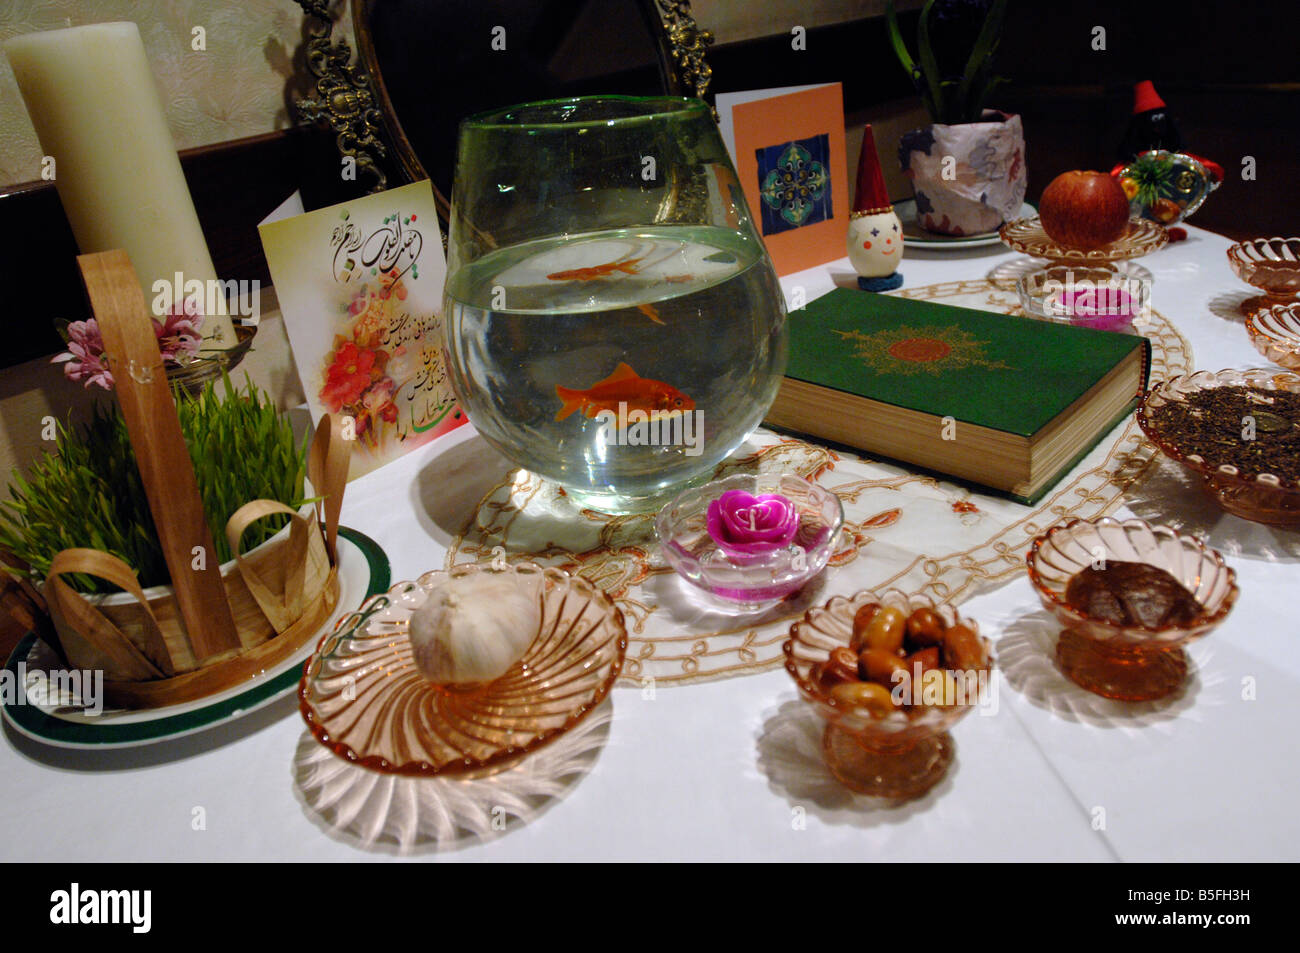 A goldfish in a bowl as part of a No Ruz display Stock Photo